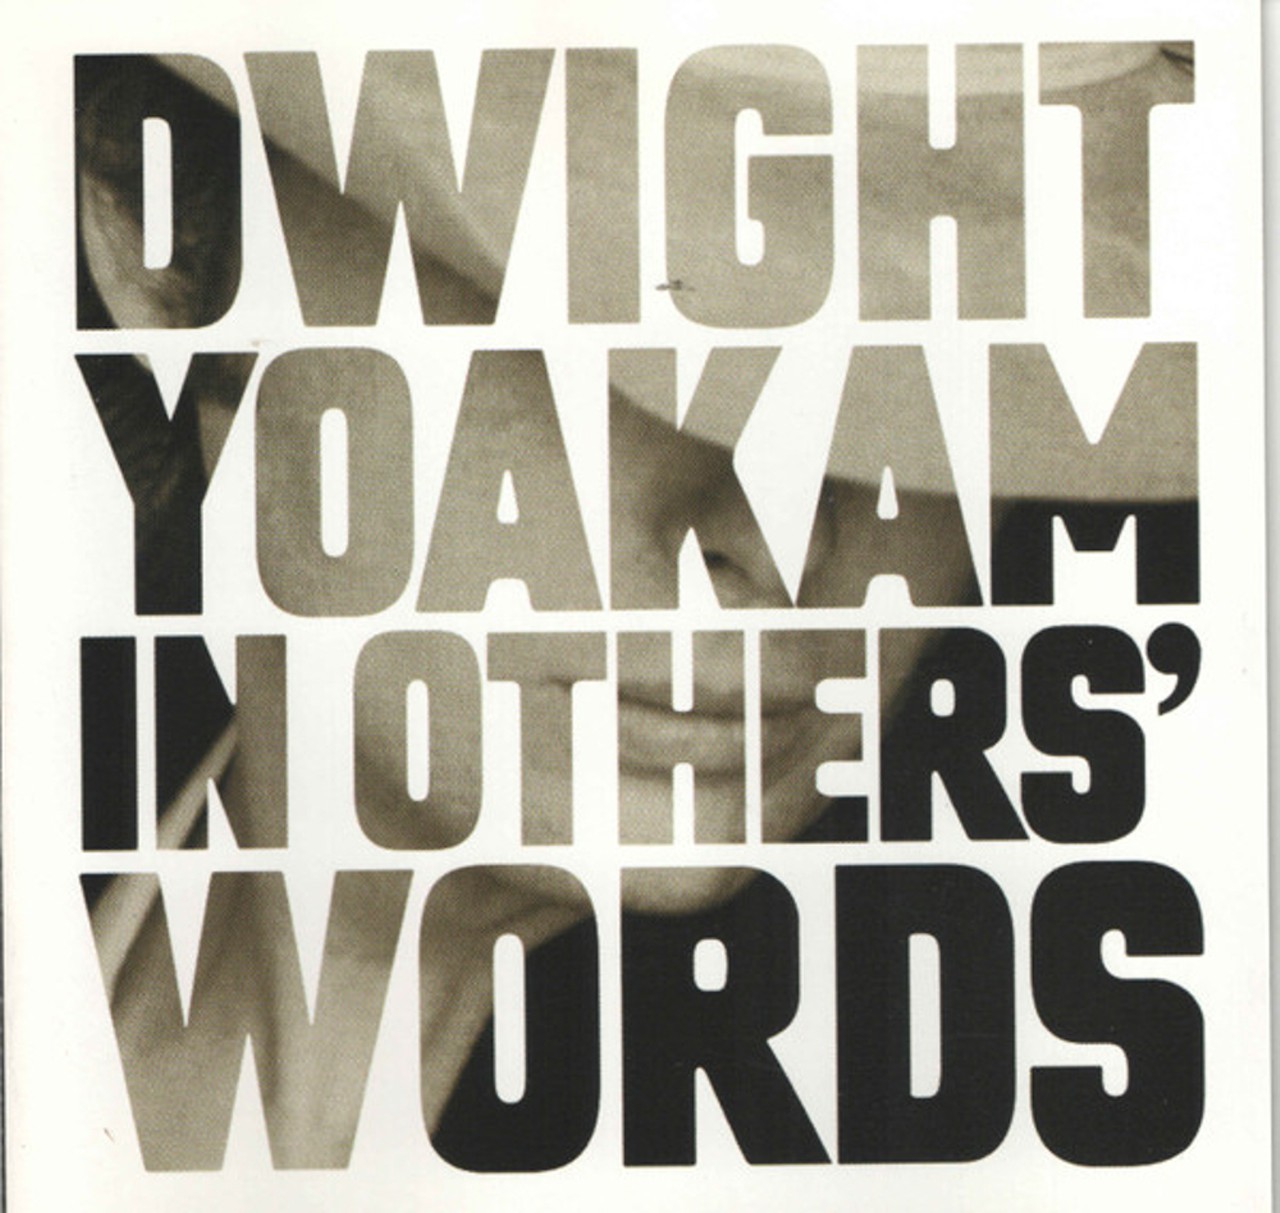  Dwight Yoakam &#151; &#147;Louisville&#148; 
&#147;I've been waiting here in Louisville
Lots of time to kill, waiting here for you
I've had to get a job in Louisville
Cause my hotel bill is six weeks overdue&#148;